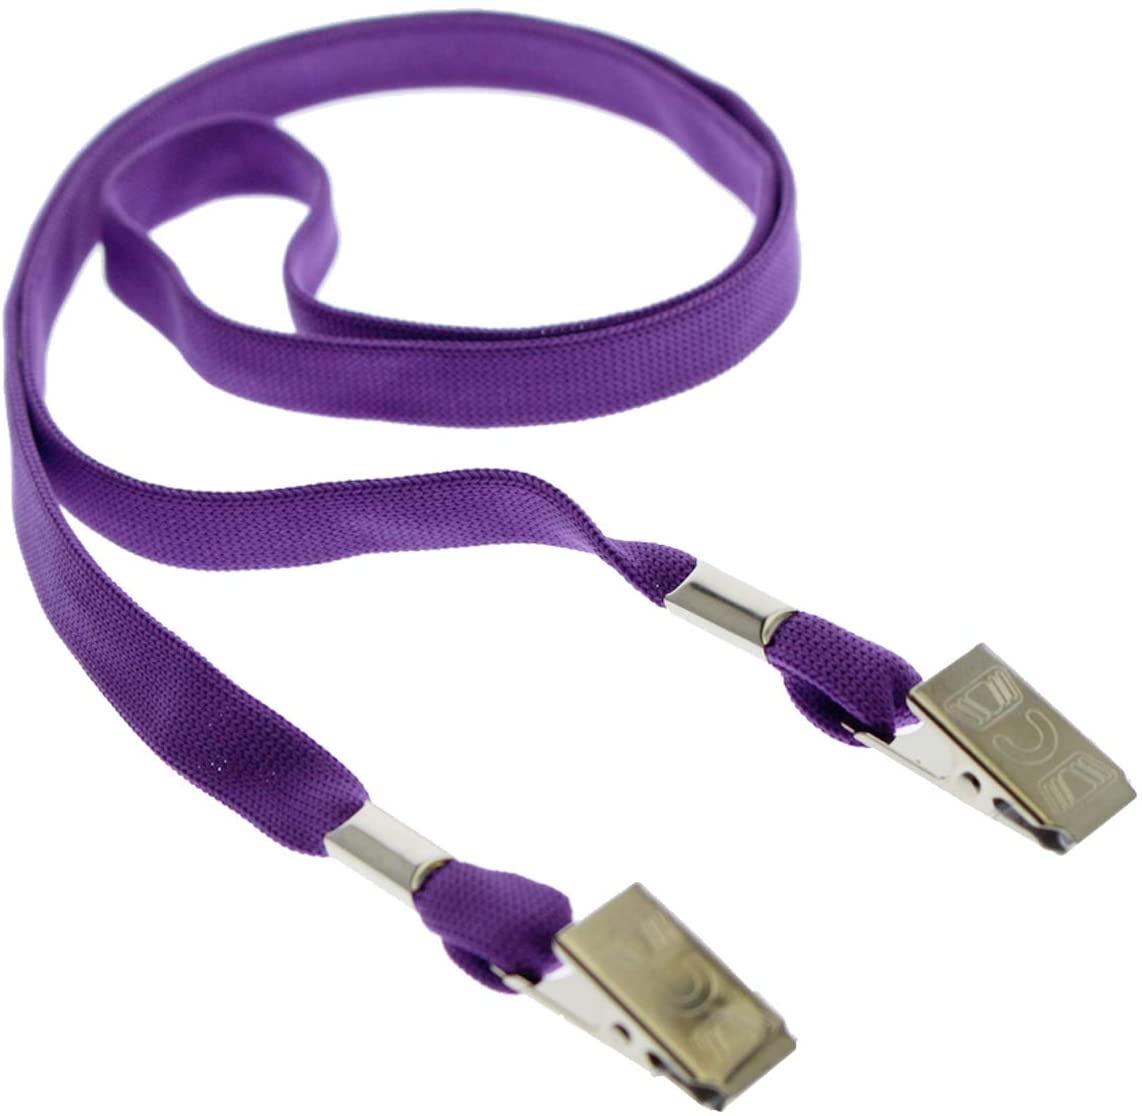 Purple Premium Double Ended Lanyard for Events and Credentials - 2 Bulldog Clips / No Twist Lanyard (NBAL38-2BC) NBAL38-2BC-PURPLE